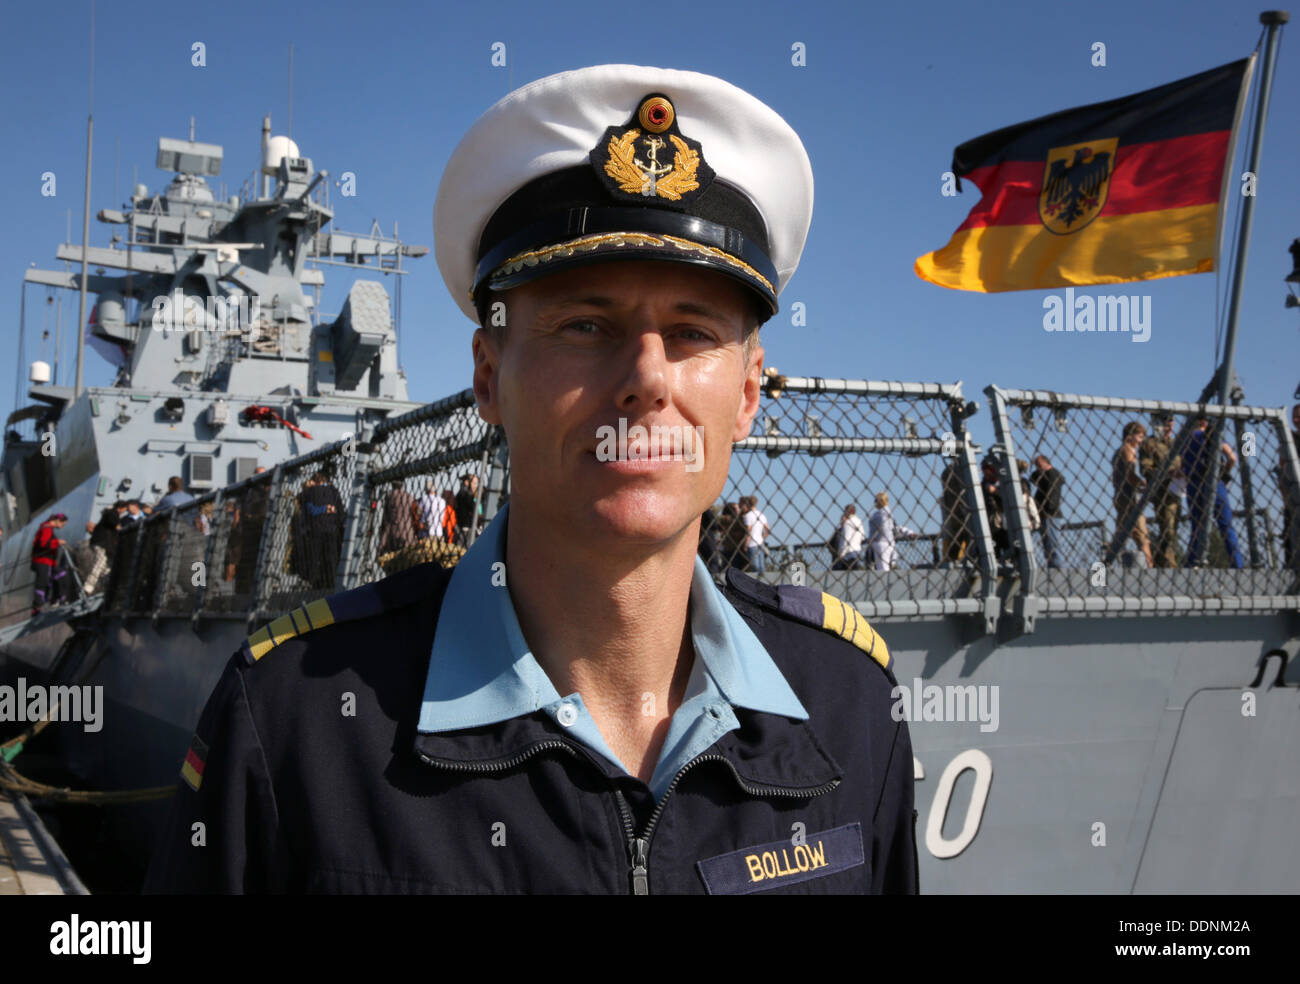 Rostock-Warnemuende, Germany. 05th Sep, 2013. Commander Boris Bollow is seen in front of hid corvette 'Braunschweig' after arriving at the home port in Rostock-Warnemuende, Germany, 05 September 2013. The corvette 'Braunschweig' with 60 soldiers on board returned from a five month Unifil mission at the Lebanese coast. Photo: BERND WUESTNECK/dpa/Alamy Live News Stock Photo